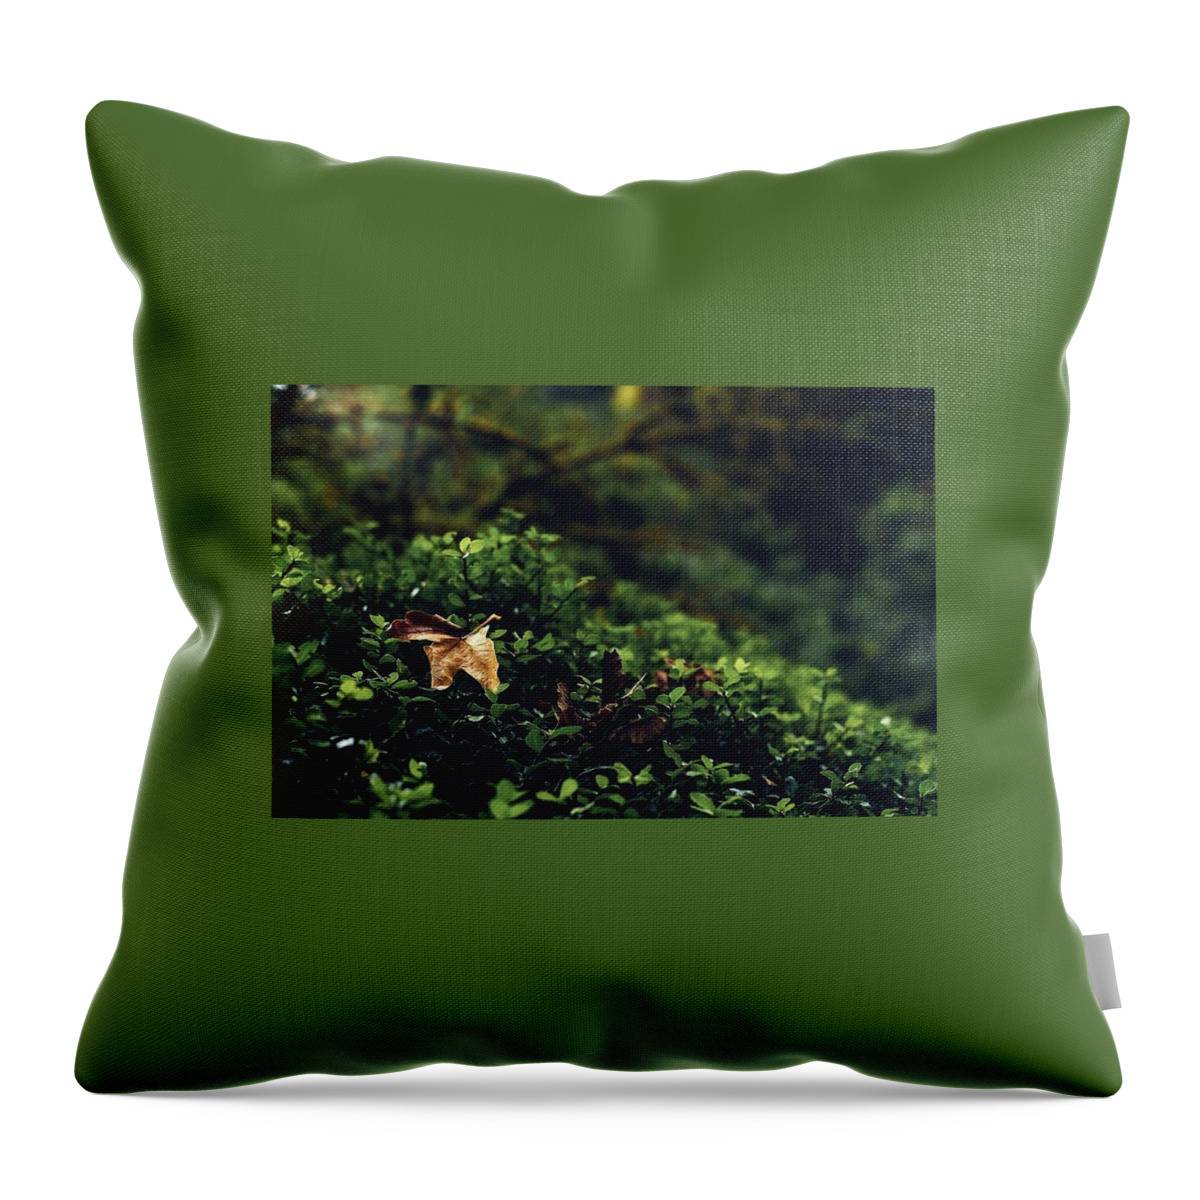 Leaf Throw Pillow featuring the photograph The Fallen by Gene Garnace